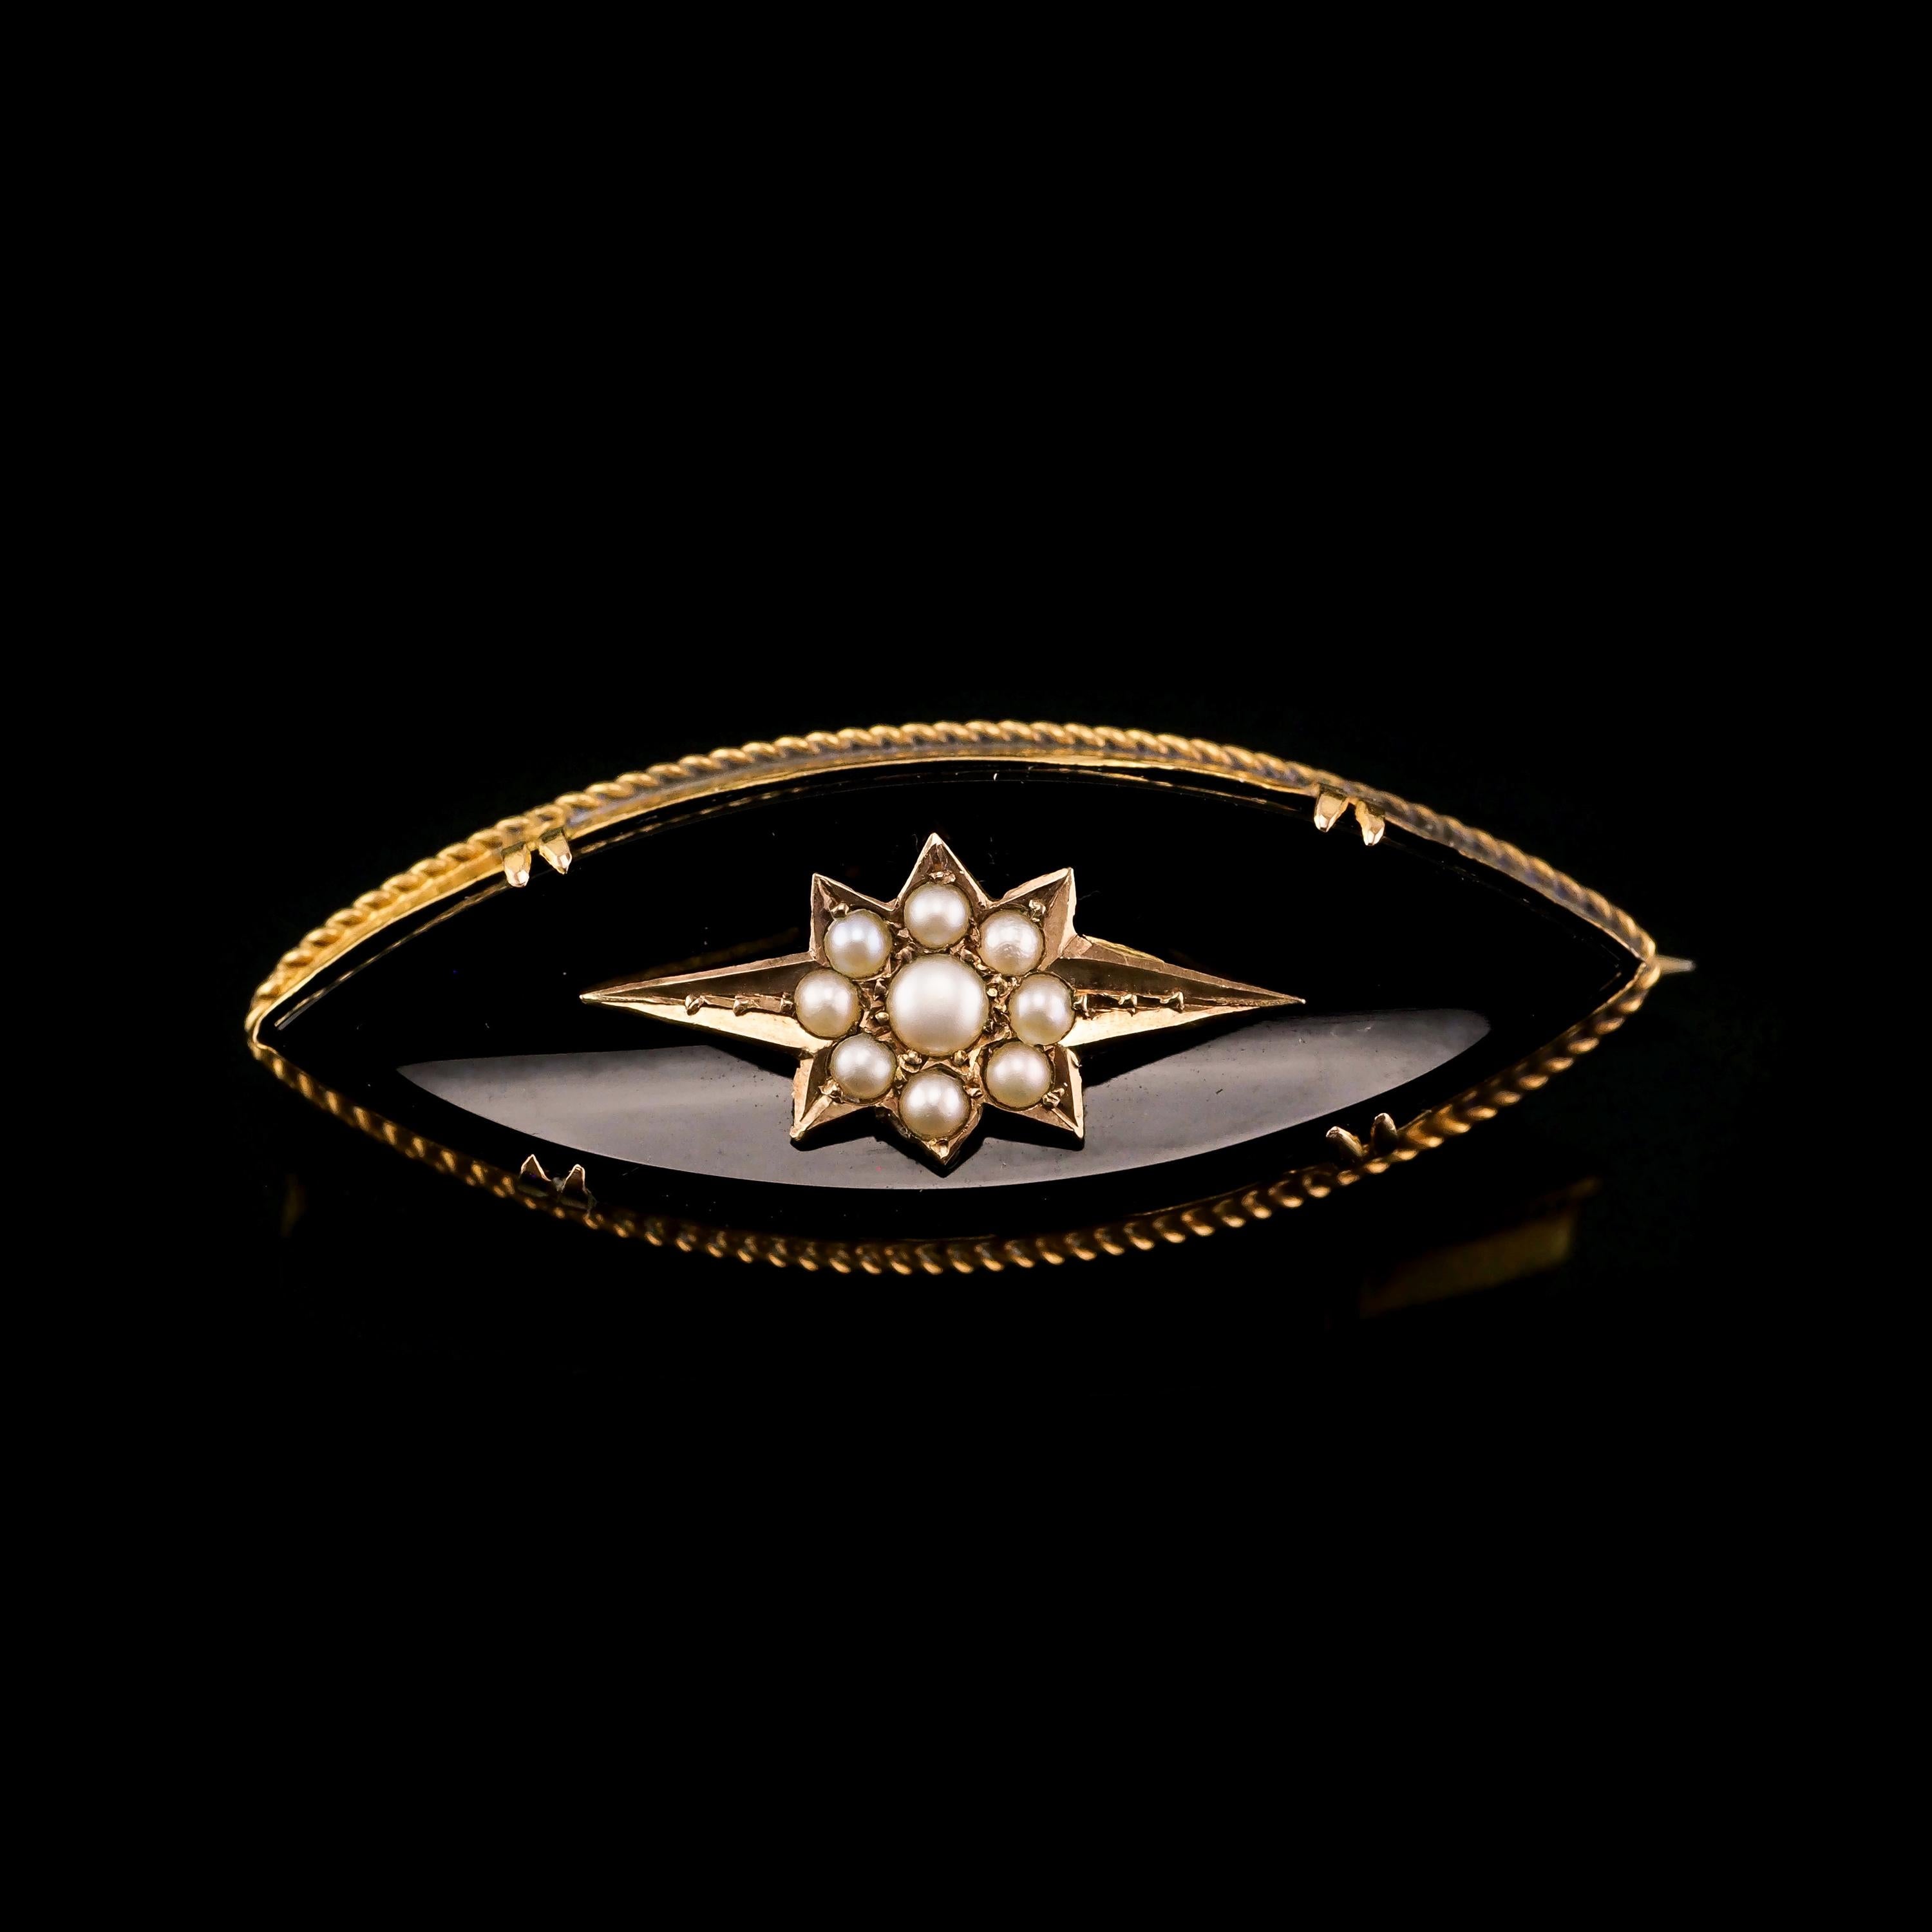 Antique Victorian 18k Gold Onyx & Pearl Star Brooch, circa 1890 For Sale 4